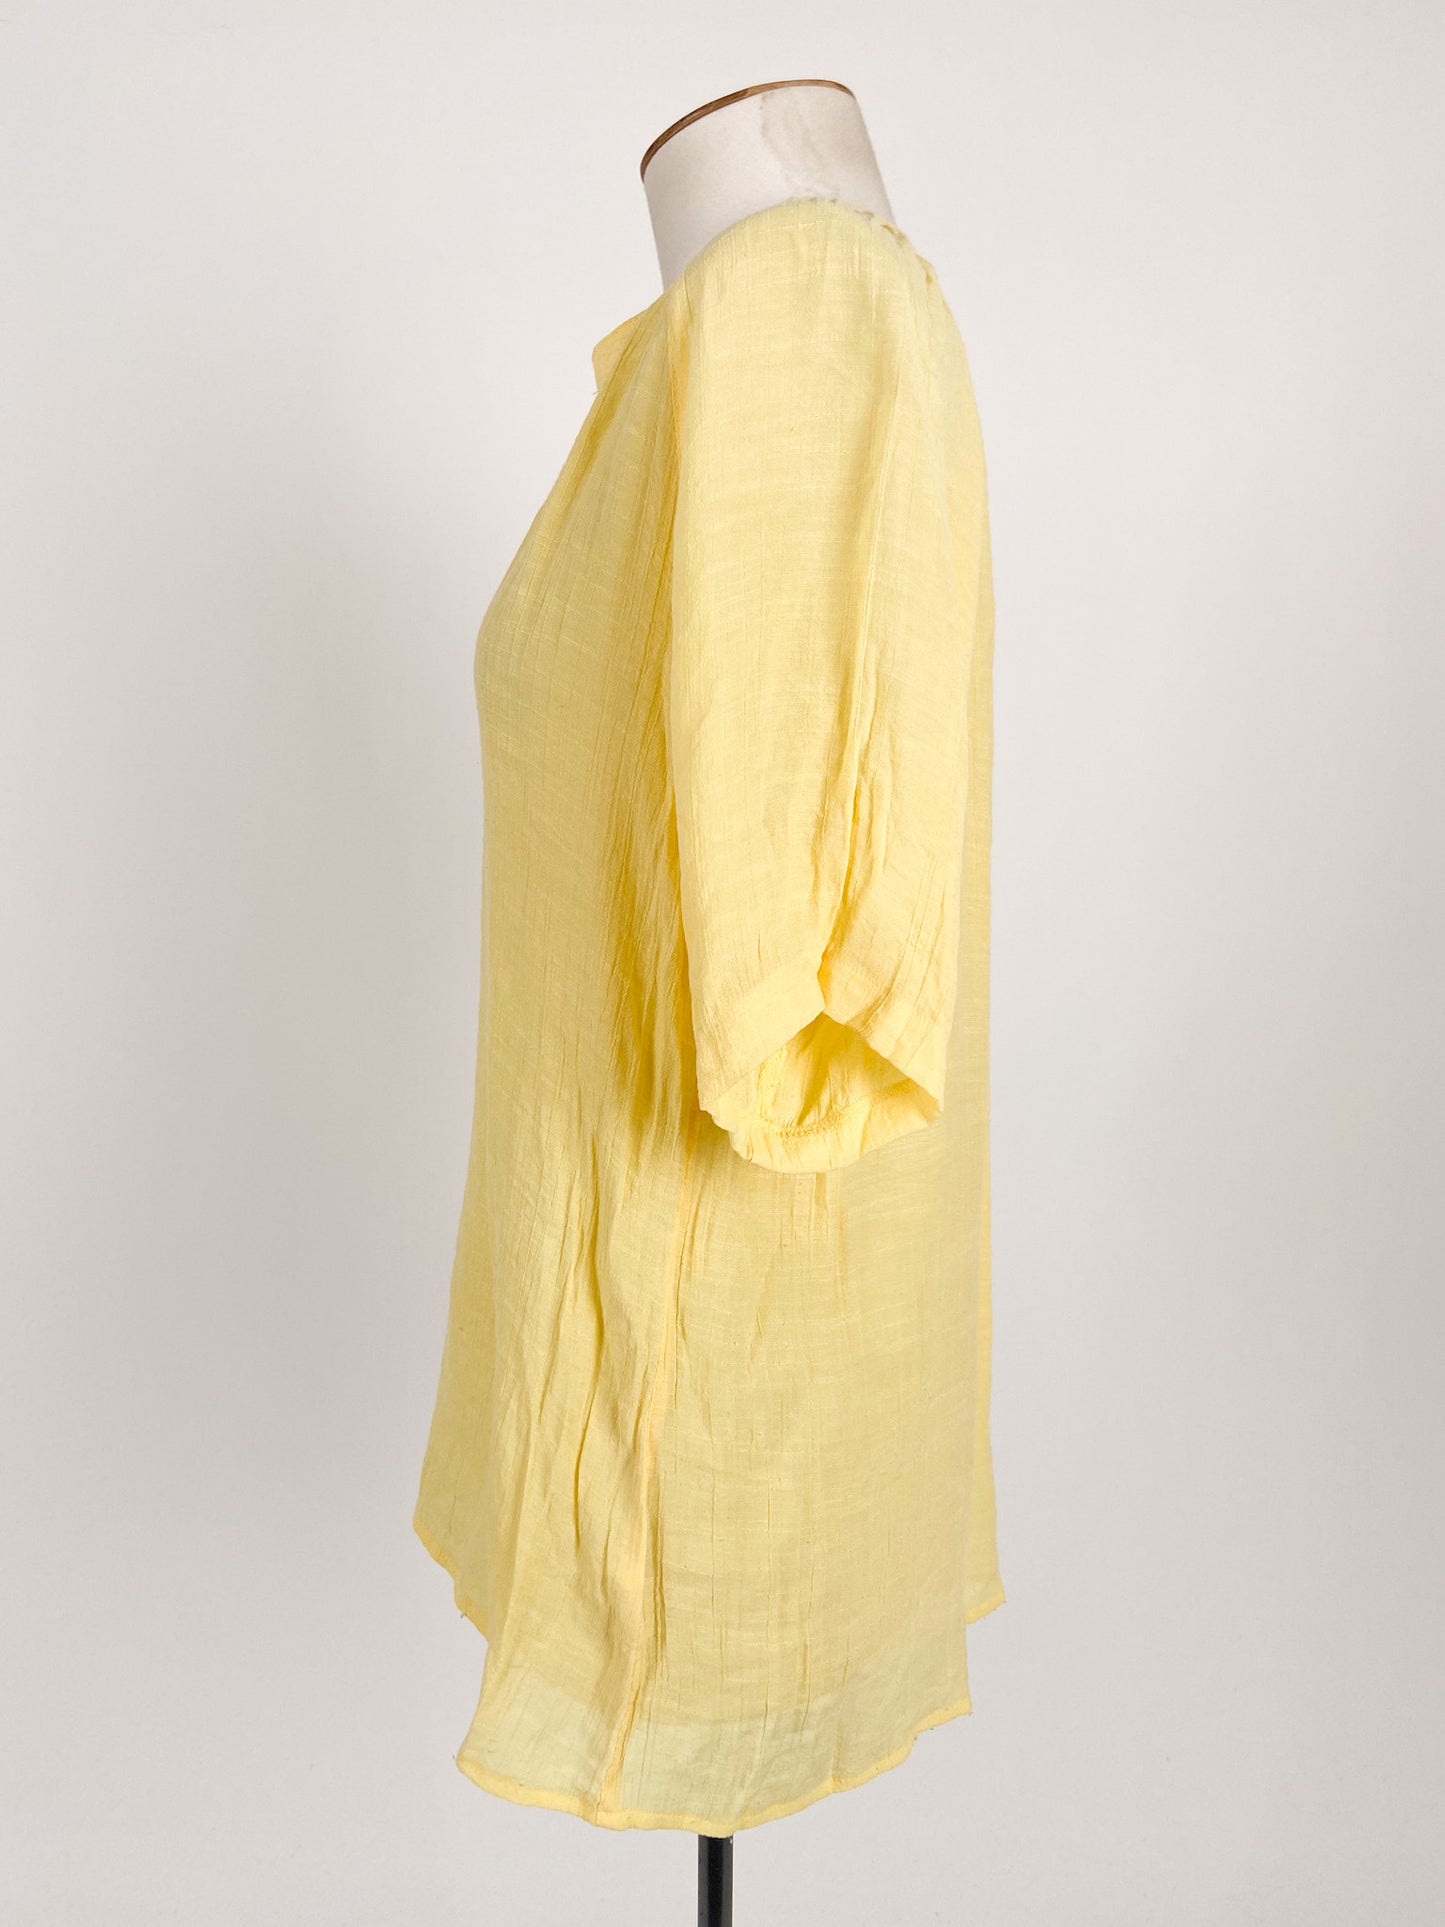 Unknown Brand | Yellow Casual/Workwear Top | Size S